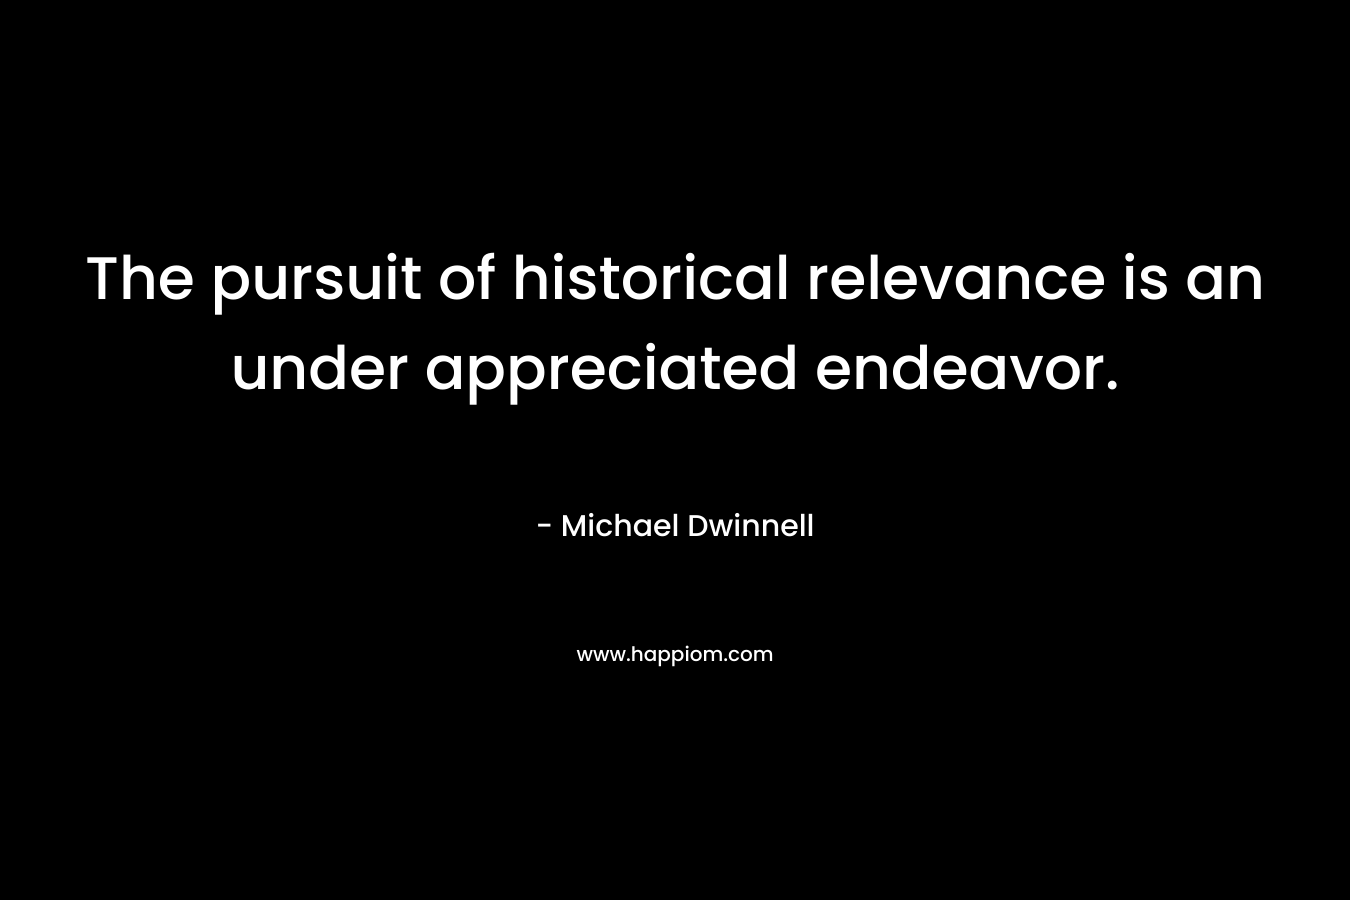 The pursuit of historical relevance is an under appreciated endeavor. – Michael Dwinnell